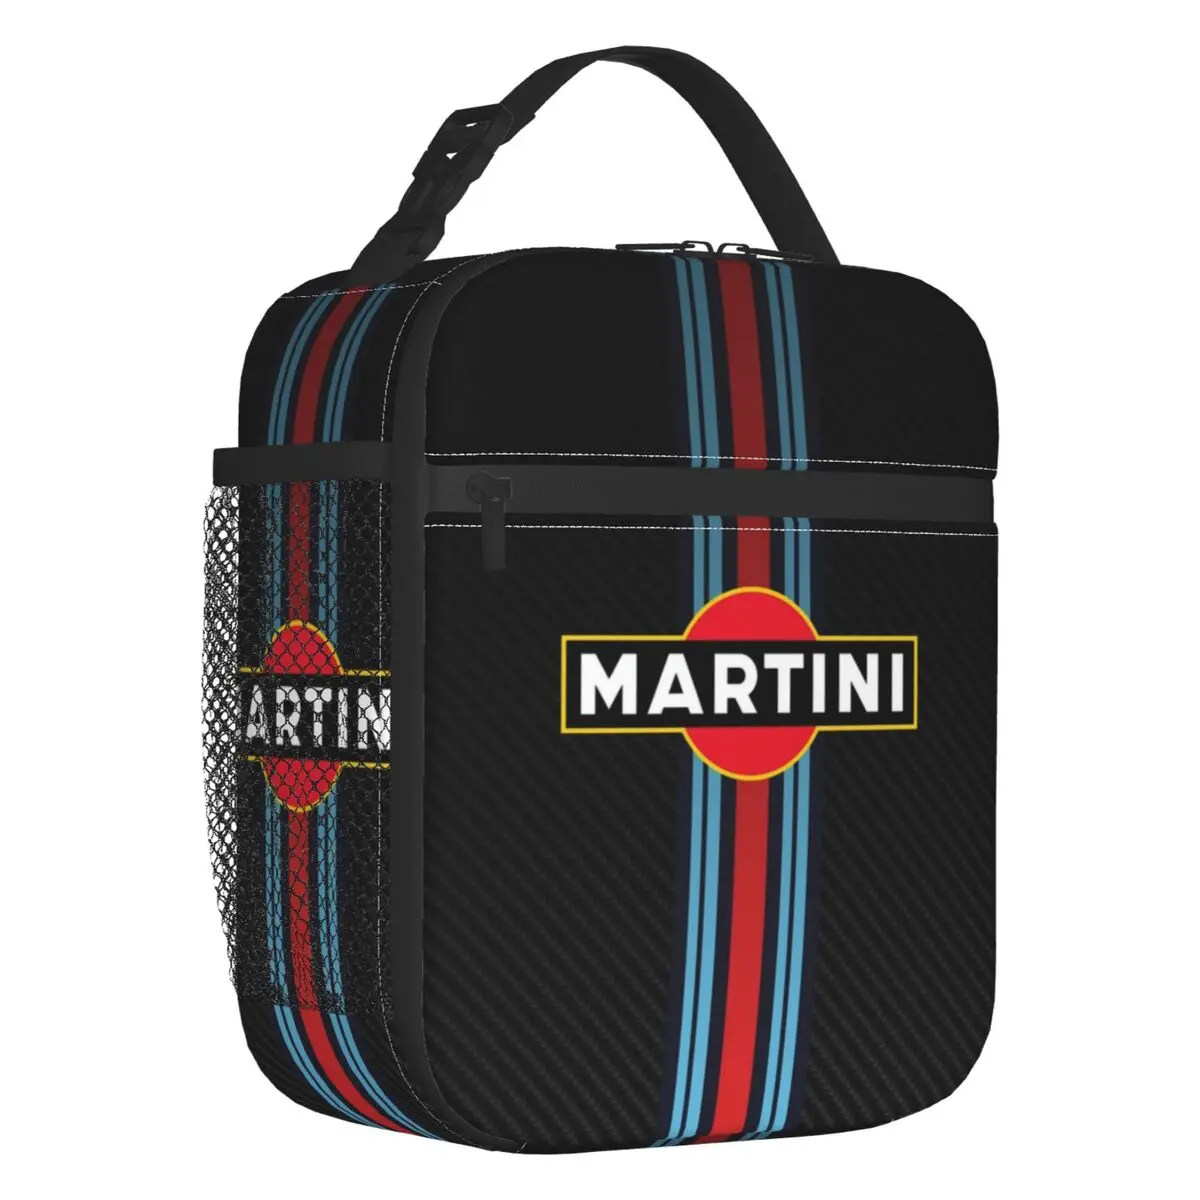 Martini Racing Stripes Insulated Lunch Tote Bag Sportscar Motor Racing Portable Cooler Thermal Bento Box Outdoor Camping Travel